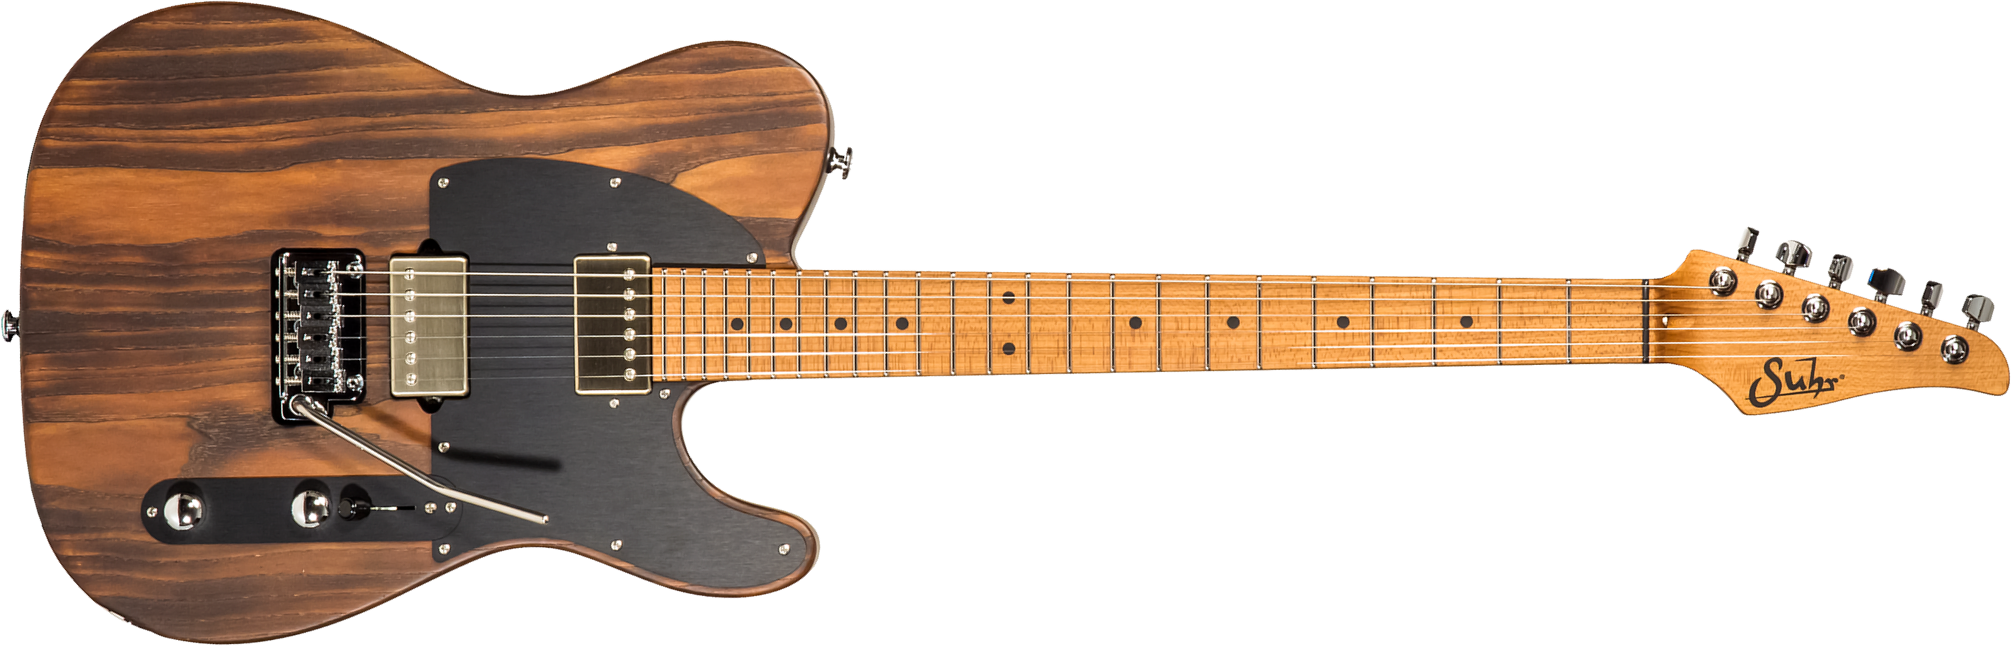 Suhr Andy Wood Modern T 01-sig-0033 Usa Signature 2h Trem Mn #72794 - Whiskey Barrel - Guitarra eléctrica con forma de tel - Main picture